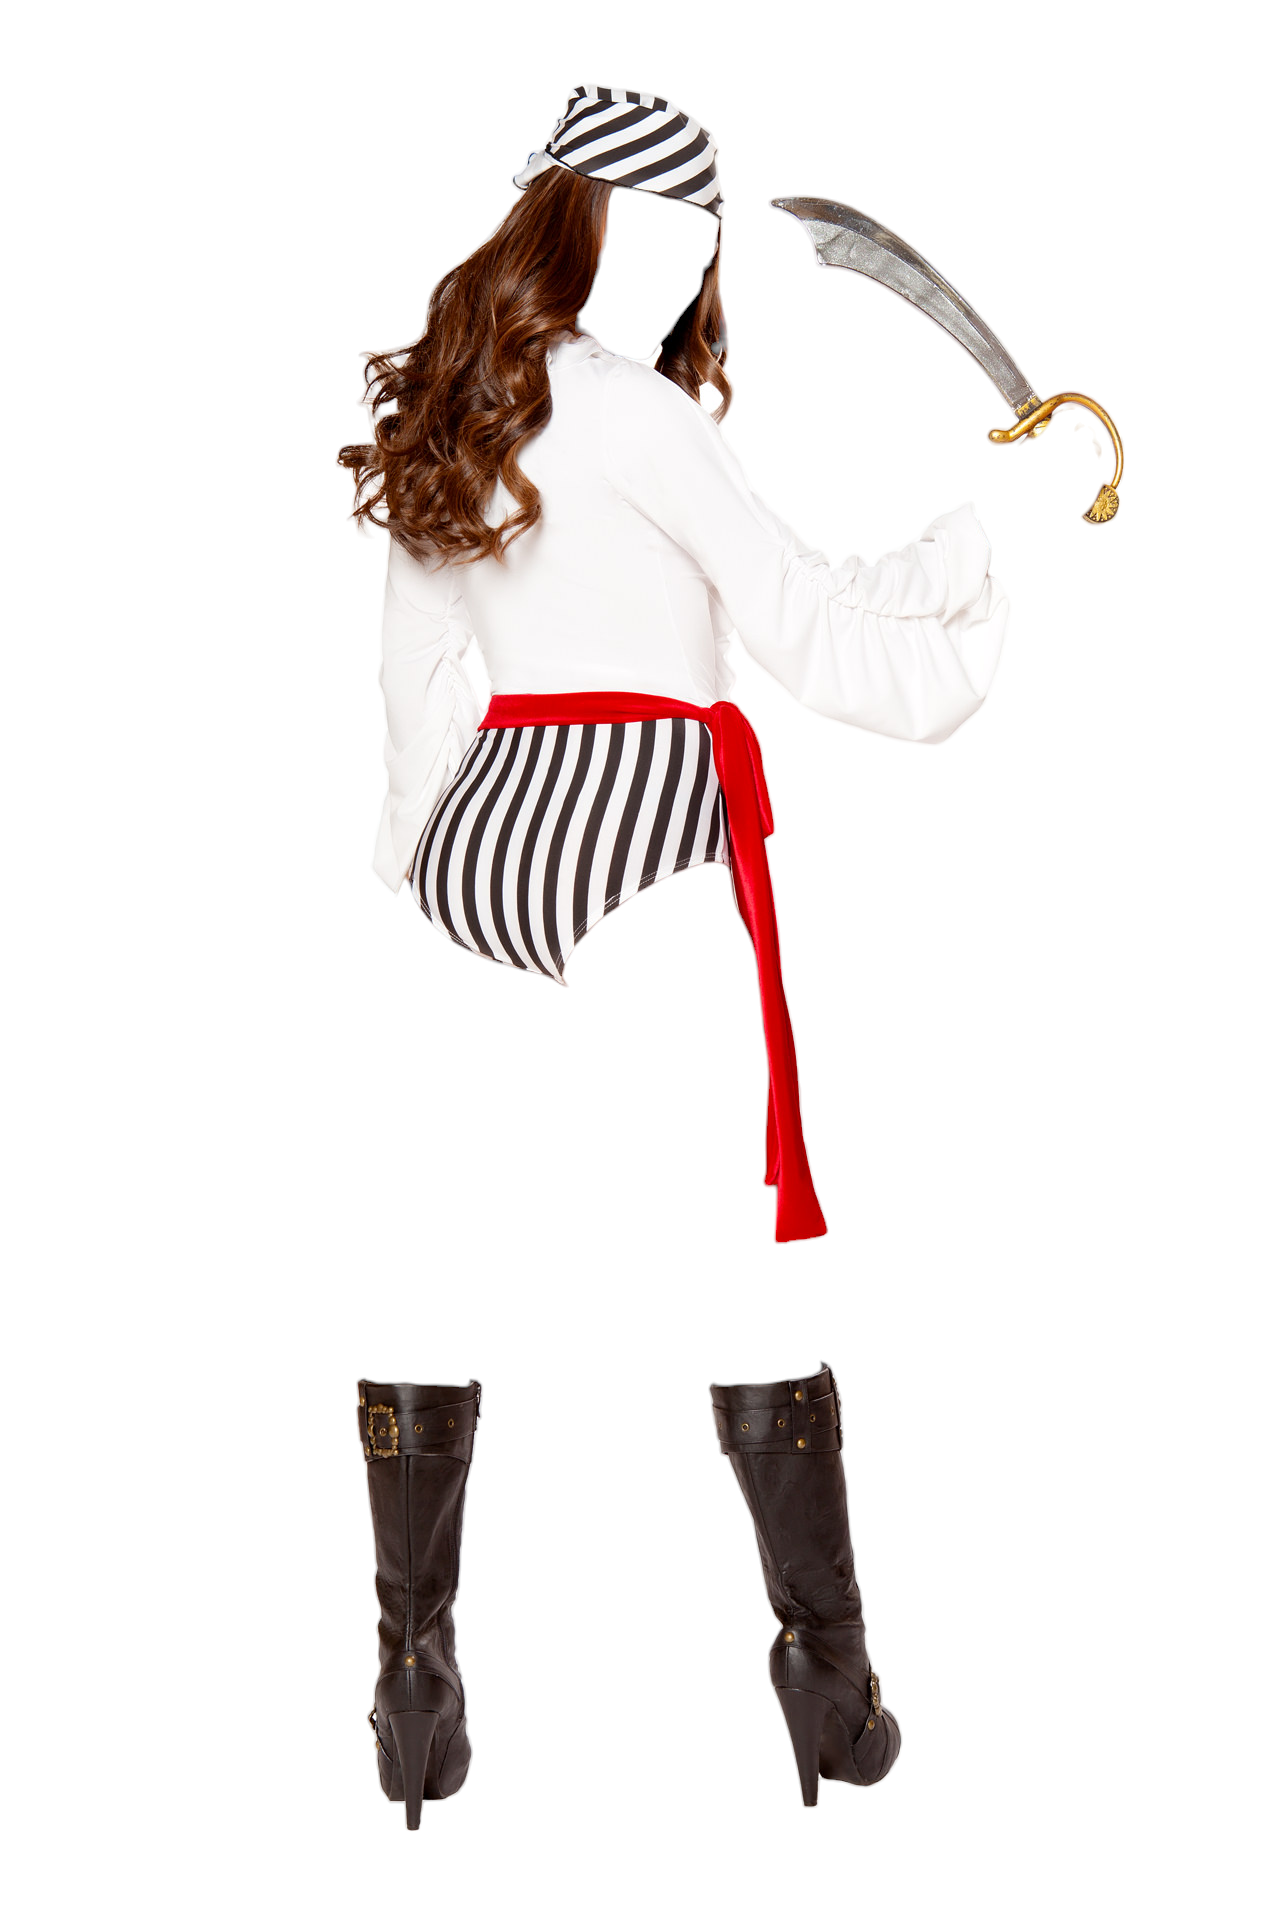 Roma Costume 3 PC Pirate Scoundrel Romper with Lace Up Detail Black/White/Red